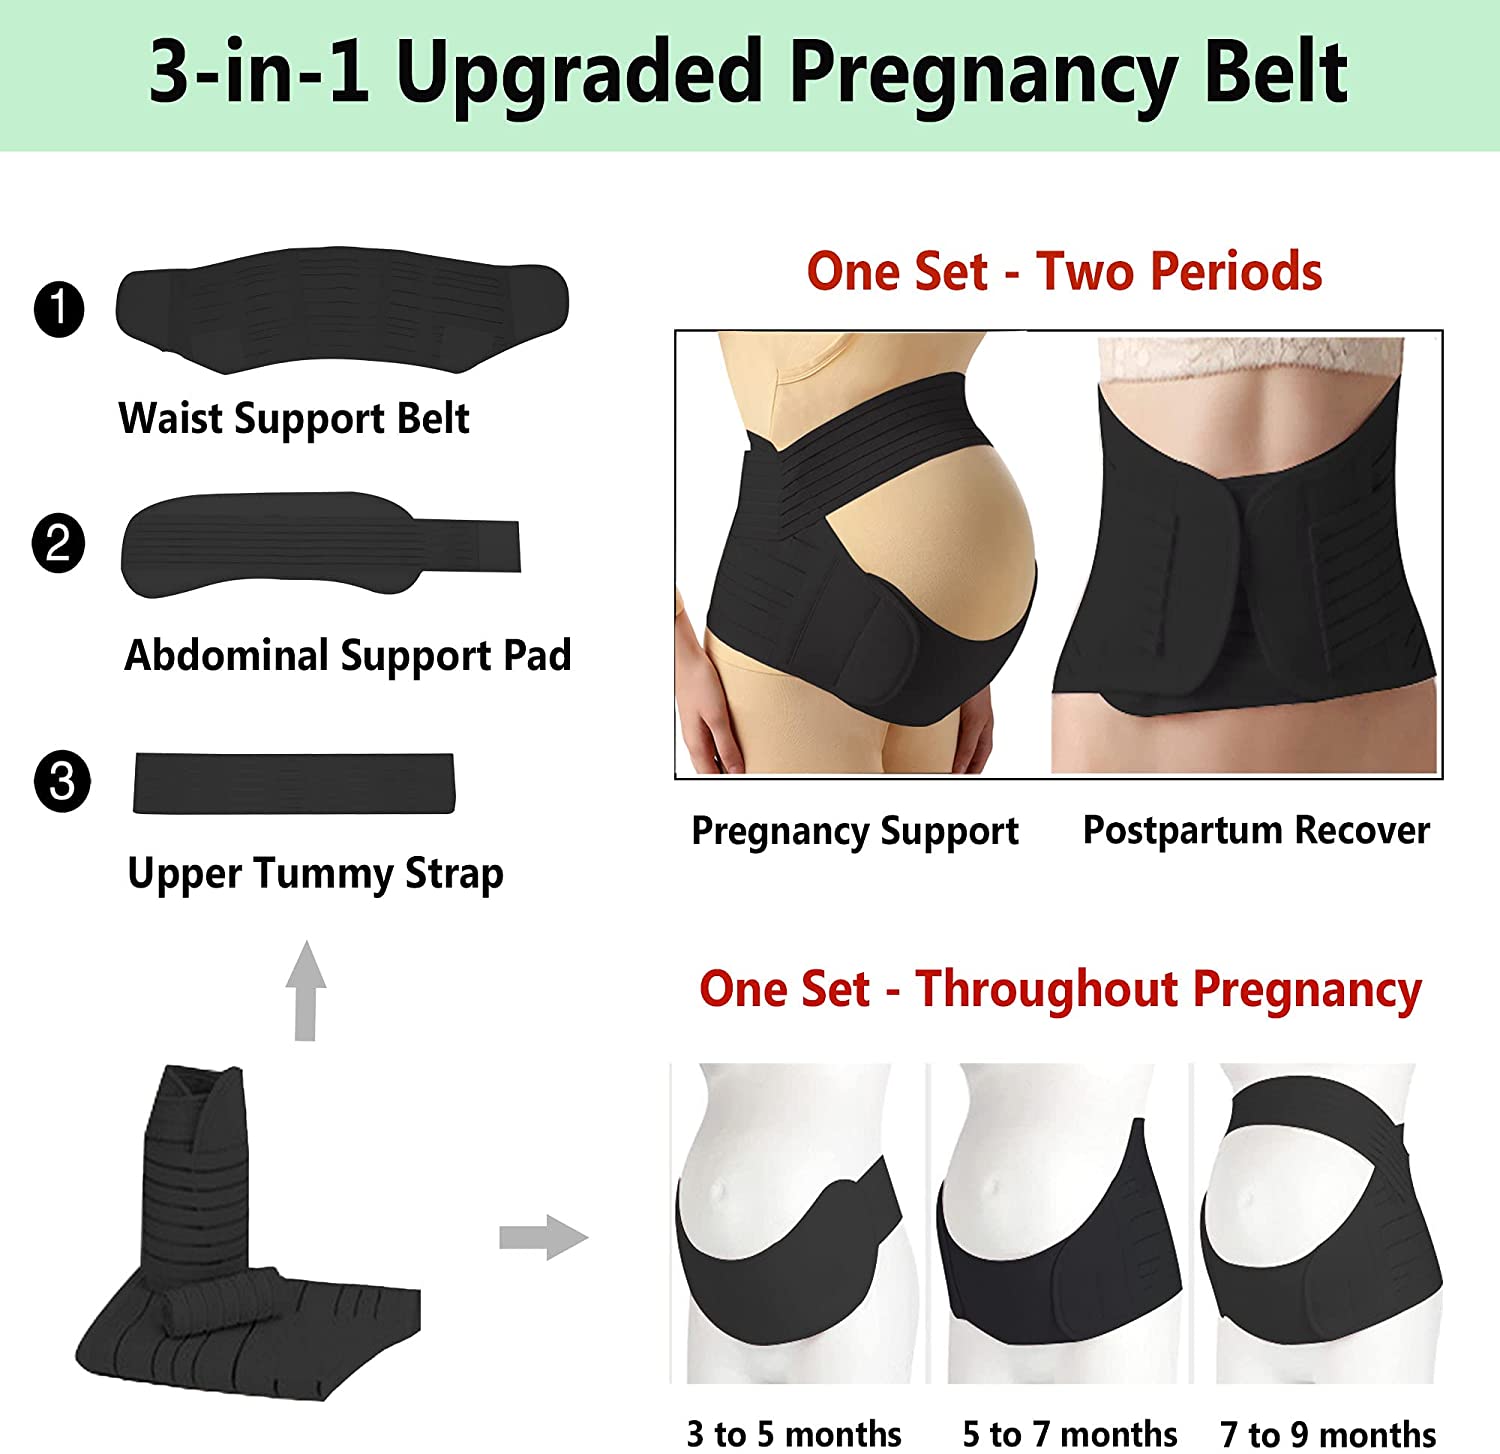 Ilfioreemio Pregnancy Belt, 3-in-1 Maternity Belt Pregnancy Support Band with Belly Band Brace for Pain Relief and Postpartum Recovery, Lightweight Breathable Adjustable Waist/Back/Abdomen Band - image 4 of 7